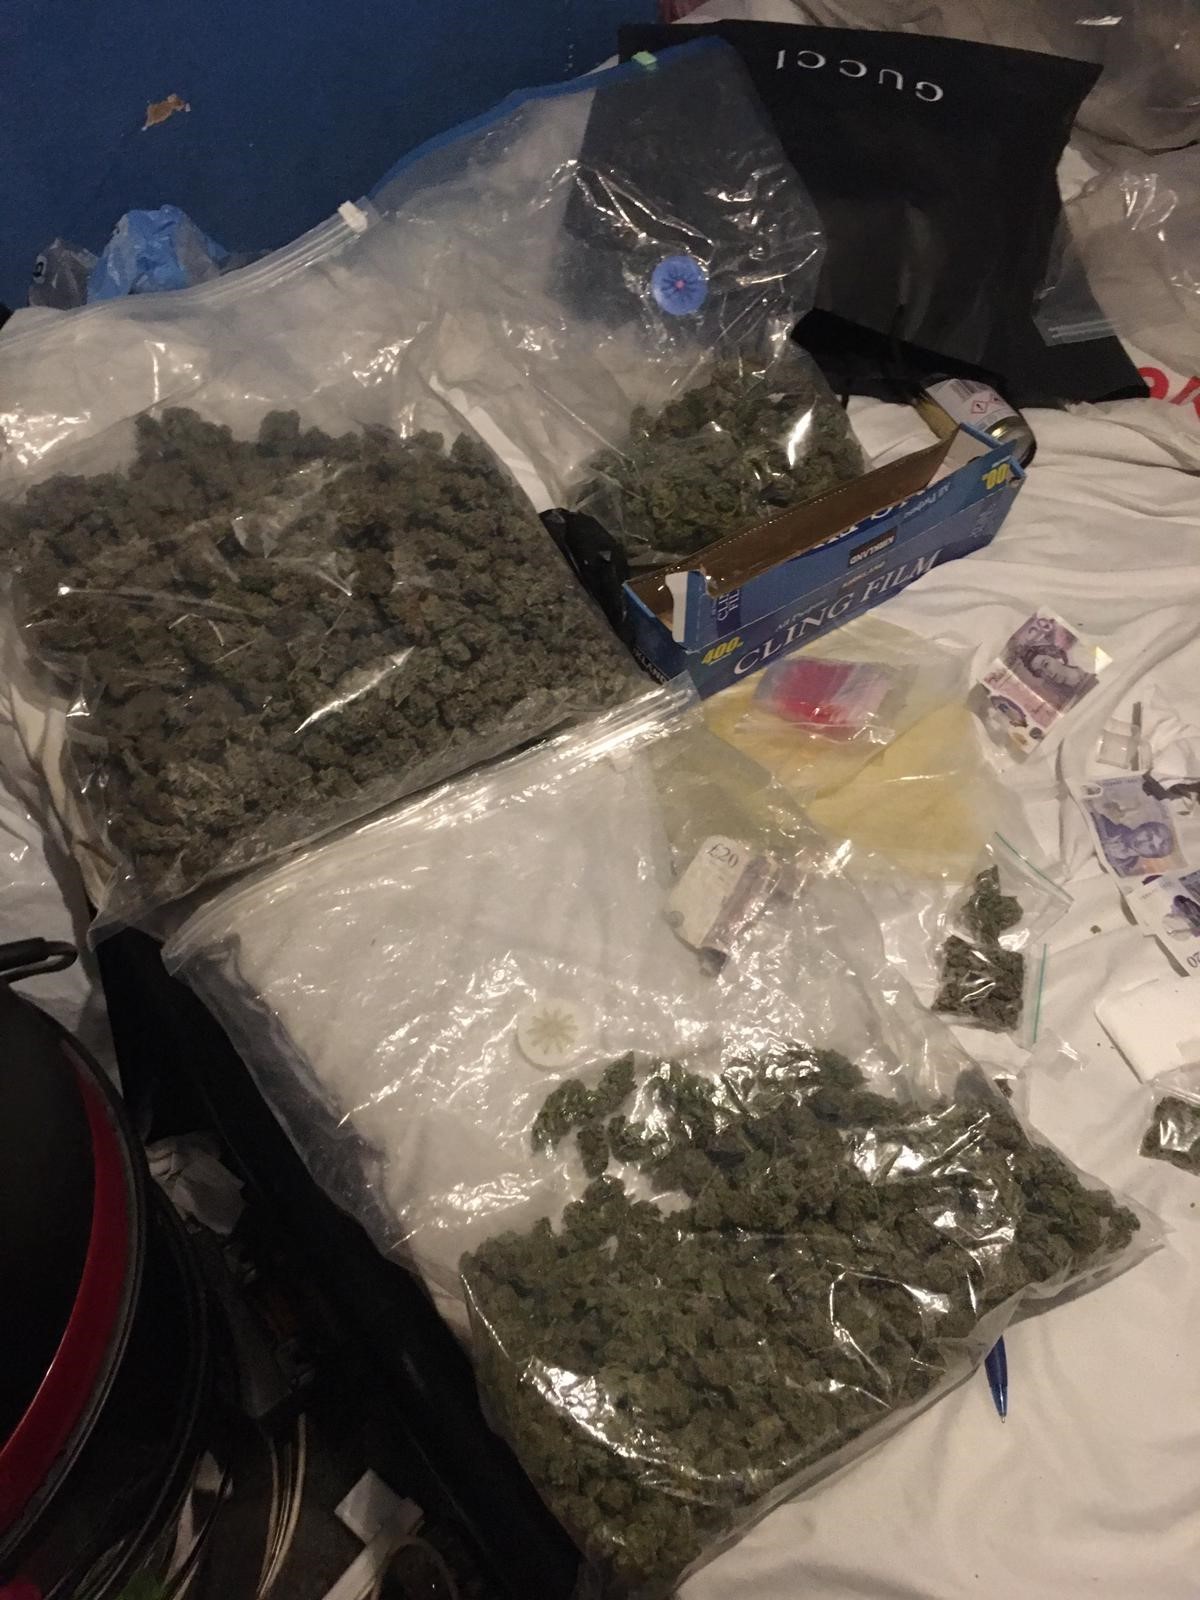 More than 150 arrests were made as Sussex Police joined the Metropolitan Police to tackle London drugs gangs bringing drugs, violence and crime to surrounding counties